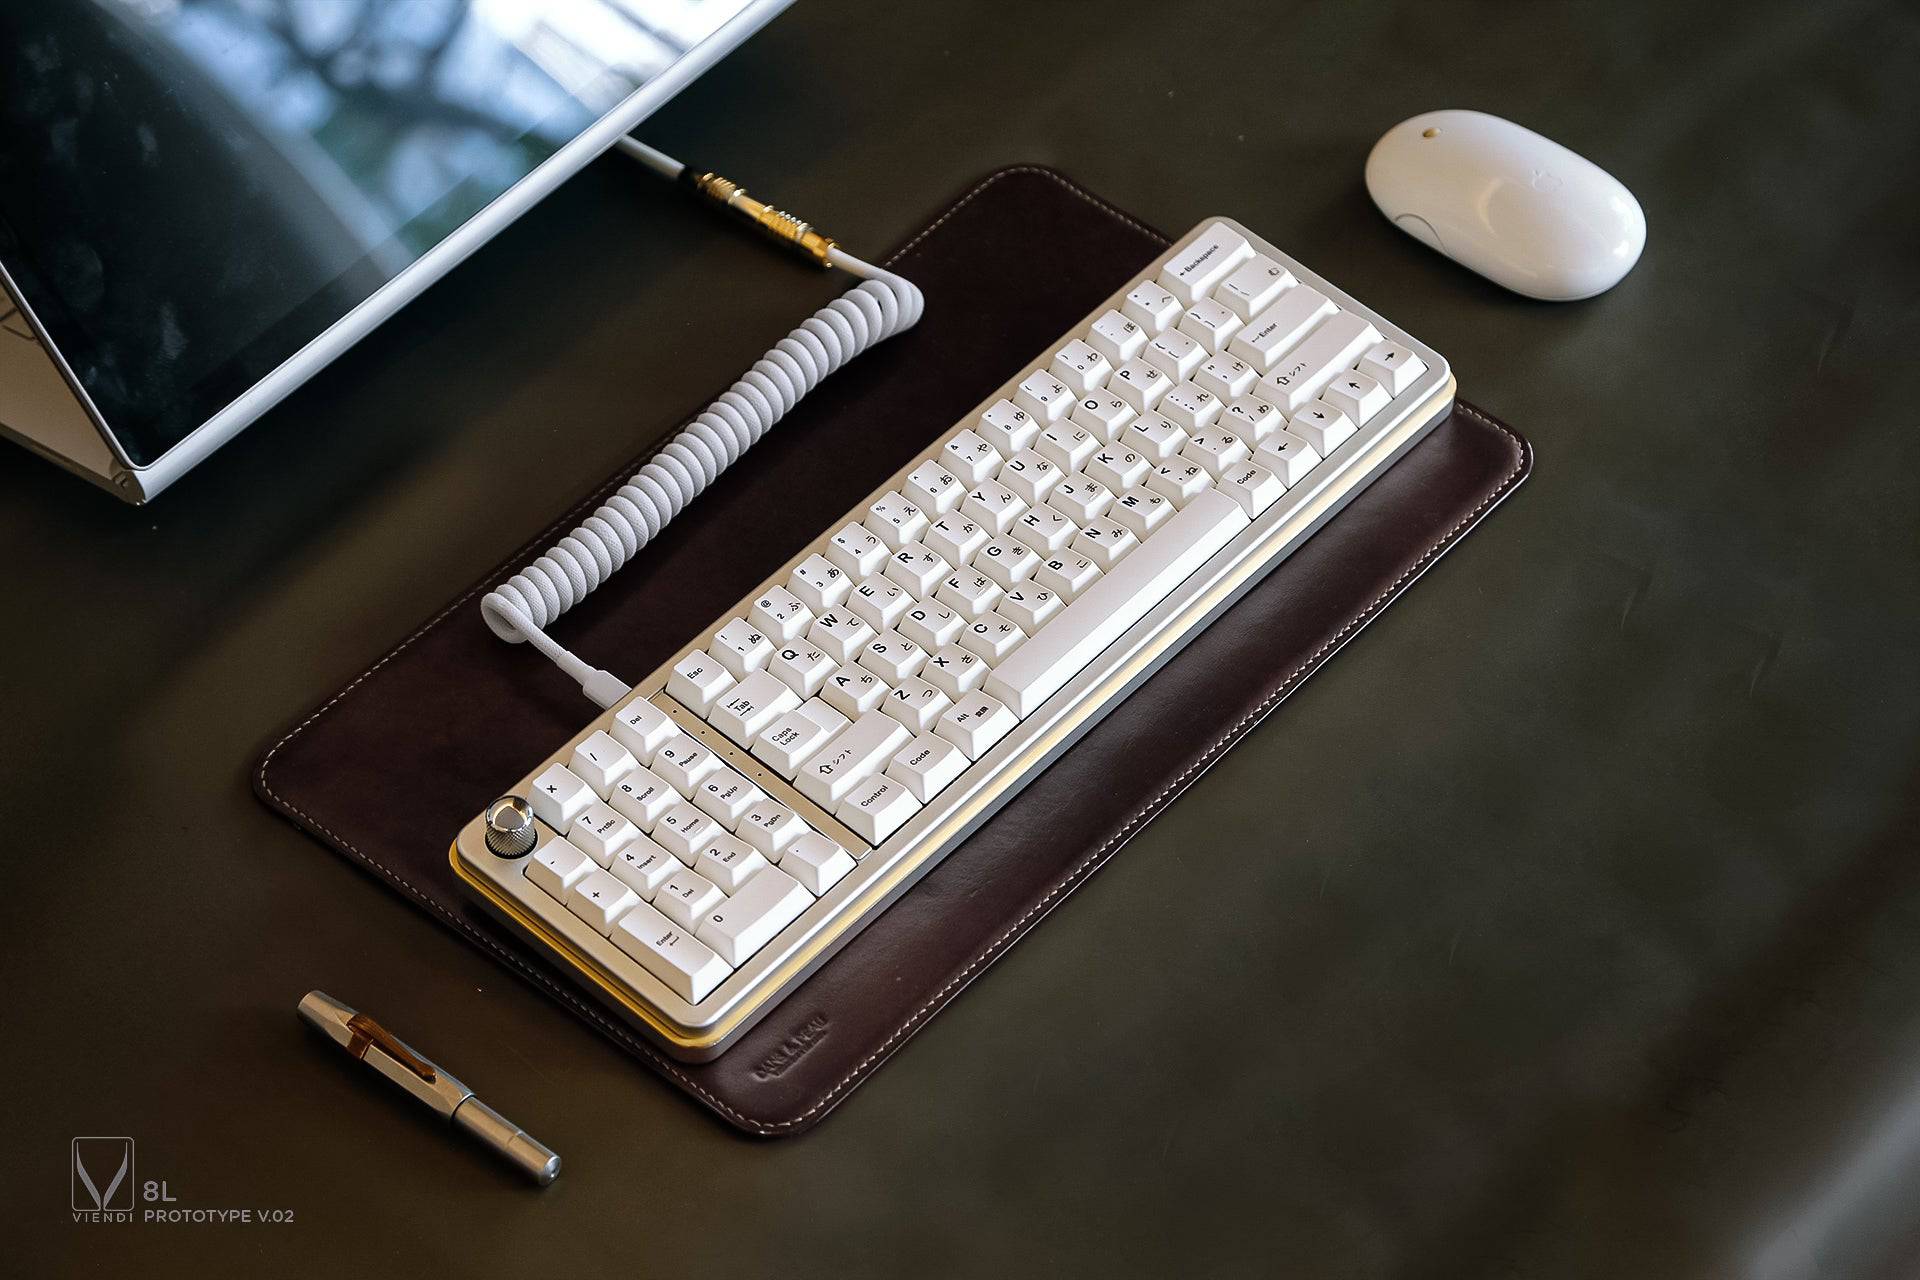 Viendi 8L full keyboard shown in a setup using the Mist color variant proxied by KeebsForAll